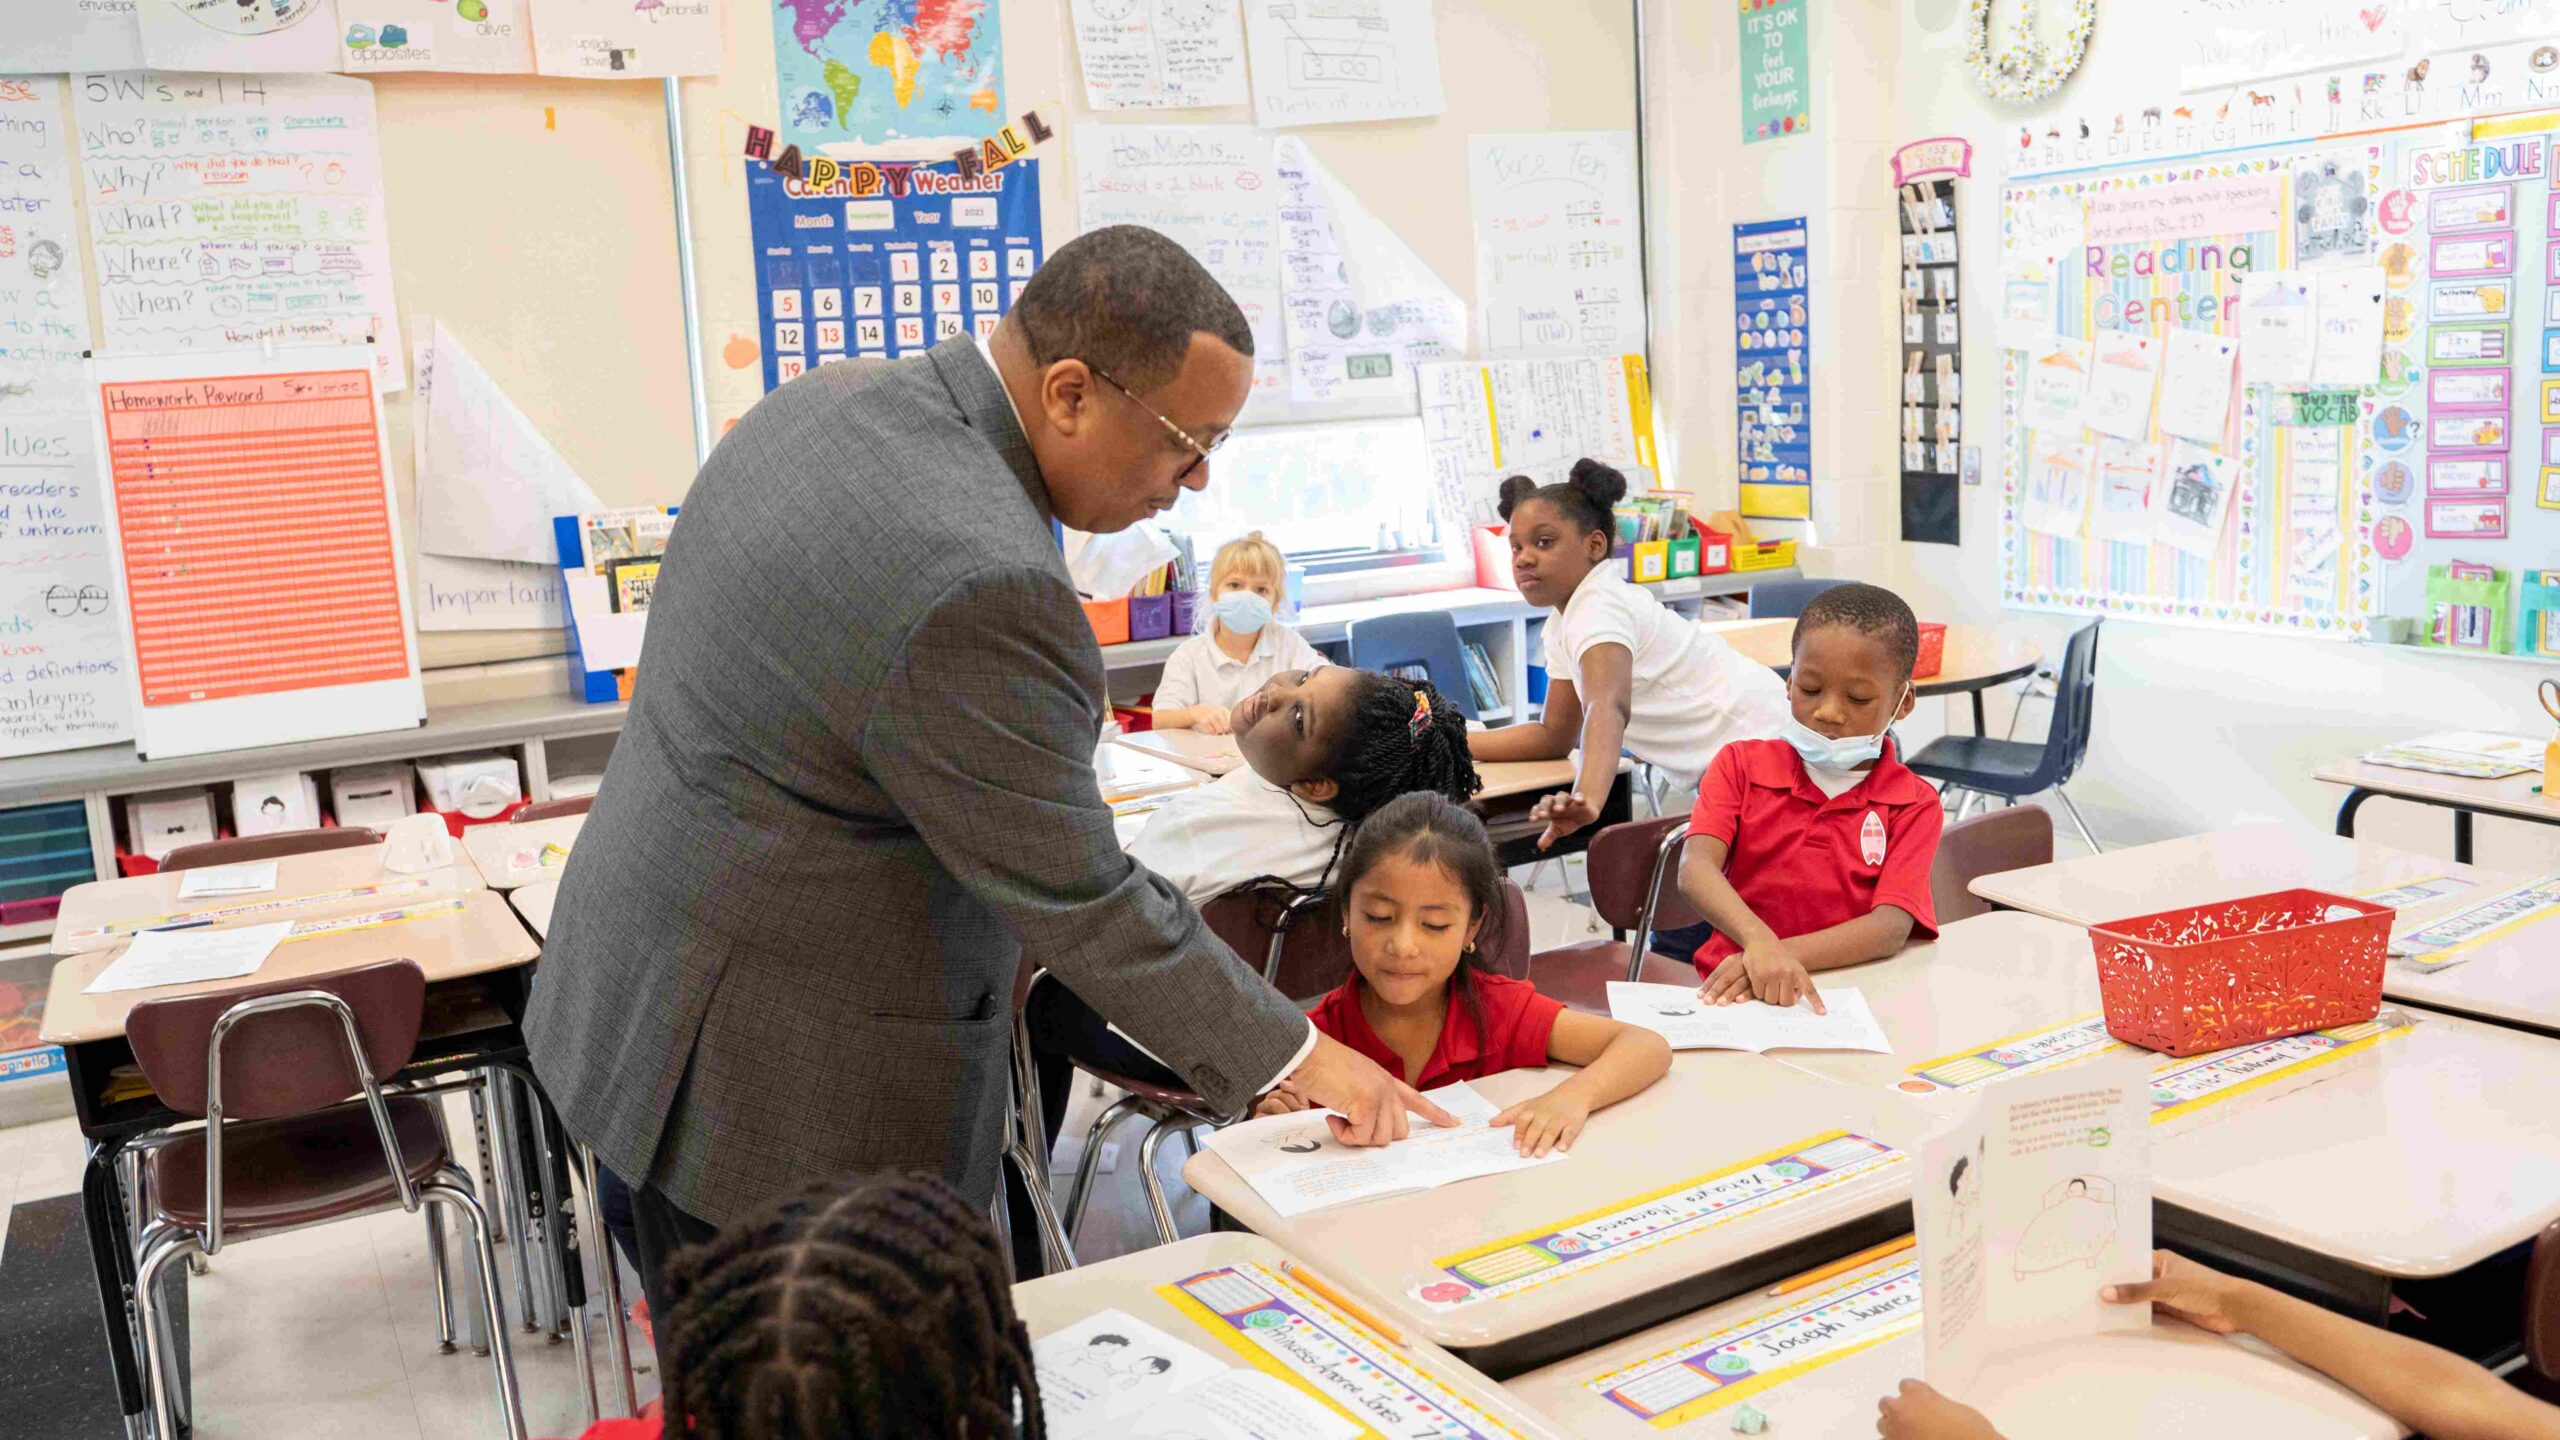 A principal in a gray suit points to a piece of paper that a student is reading in an elementary school classroom. The student sits at a cluster of four desks with other students.